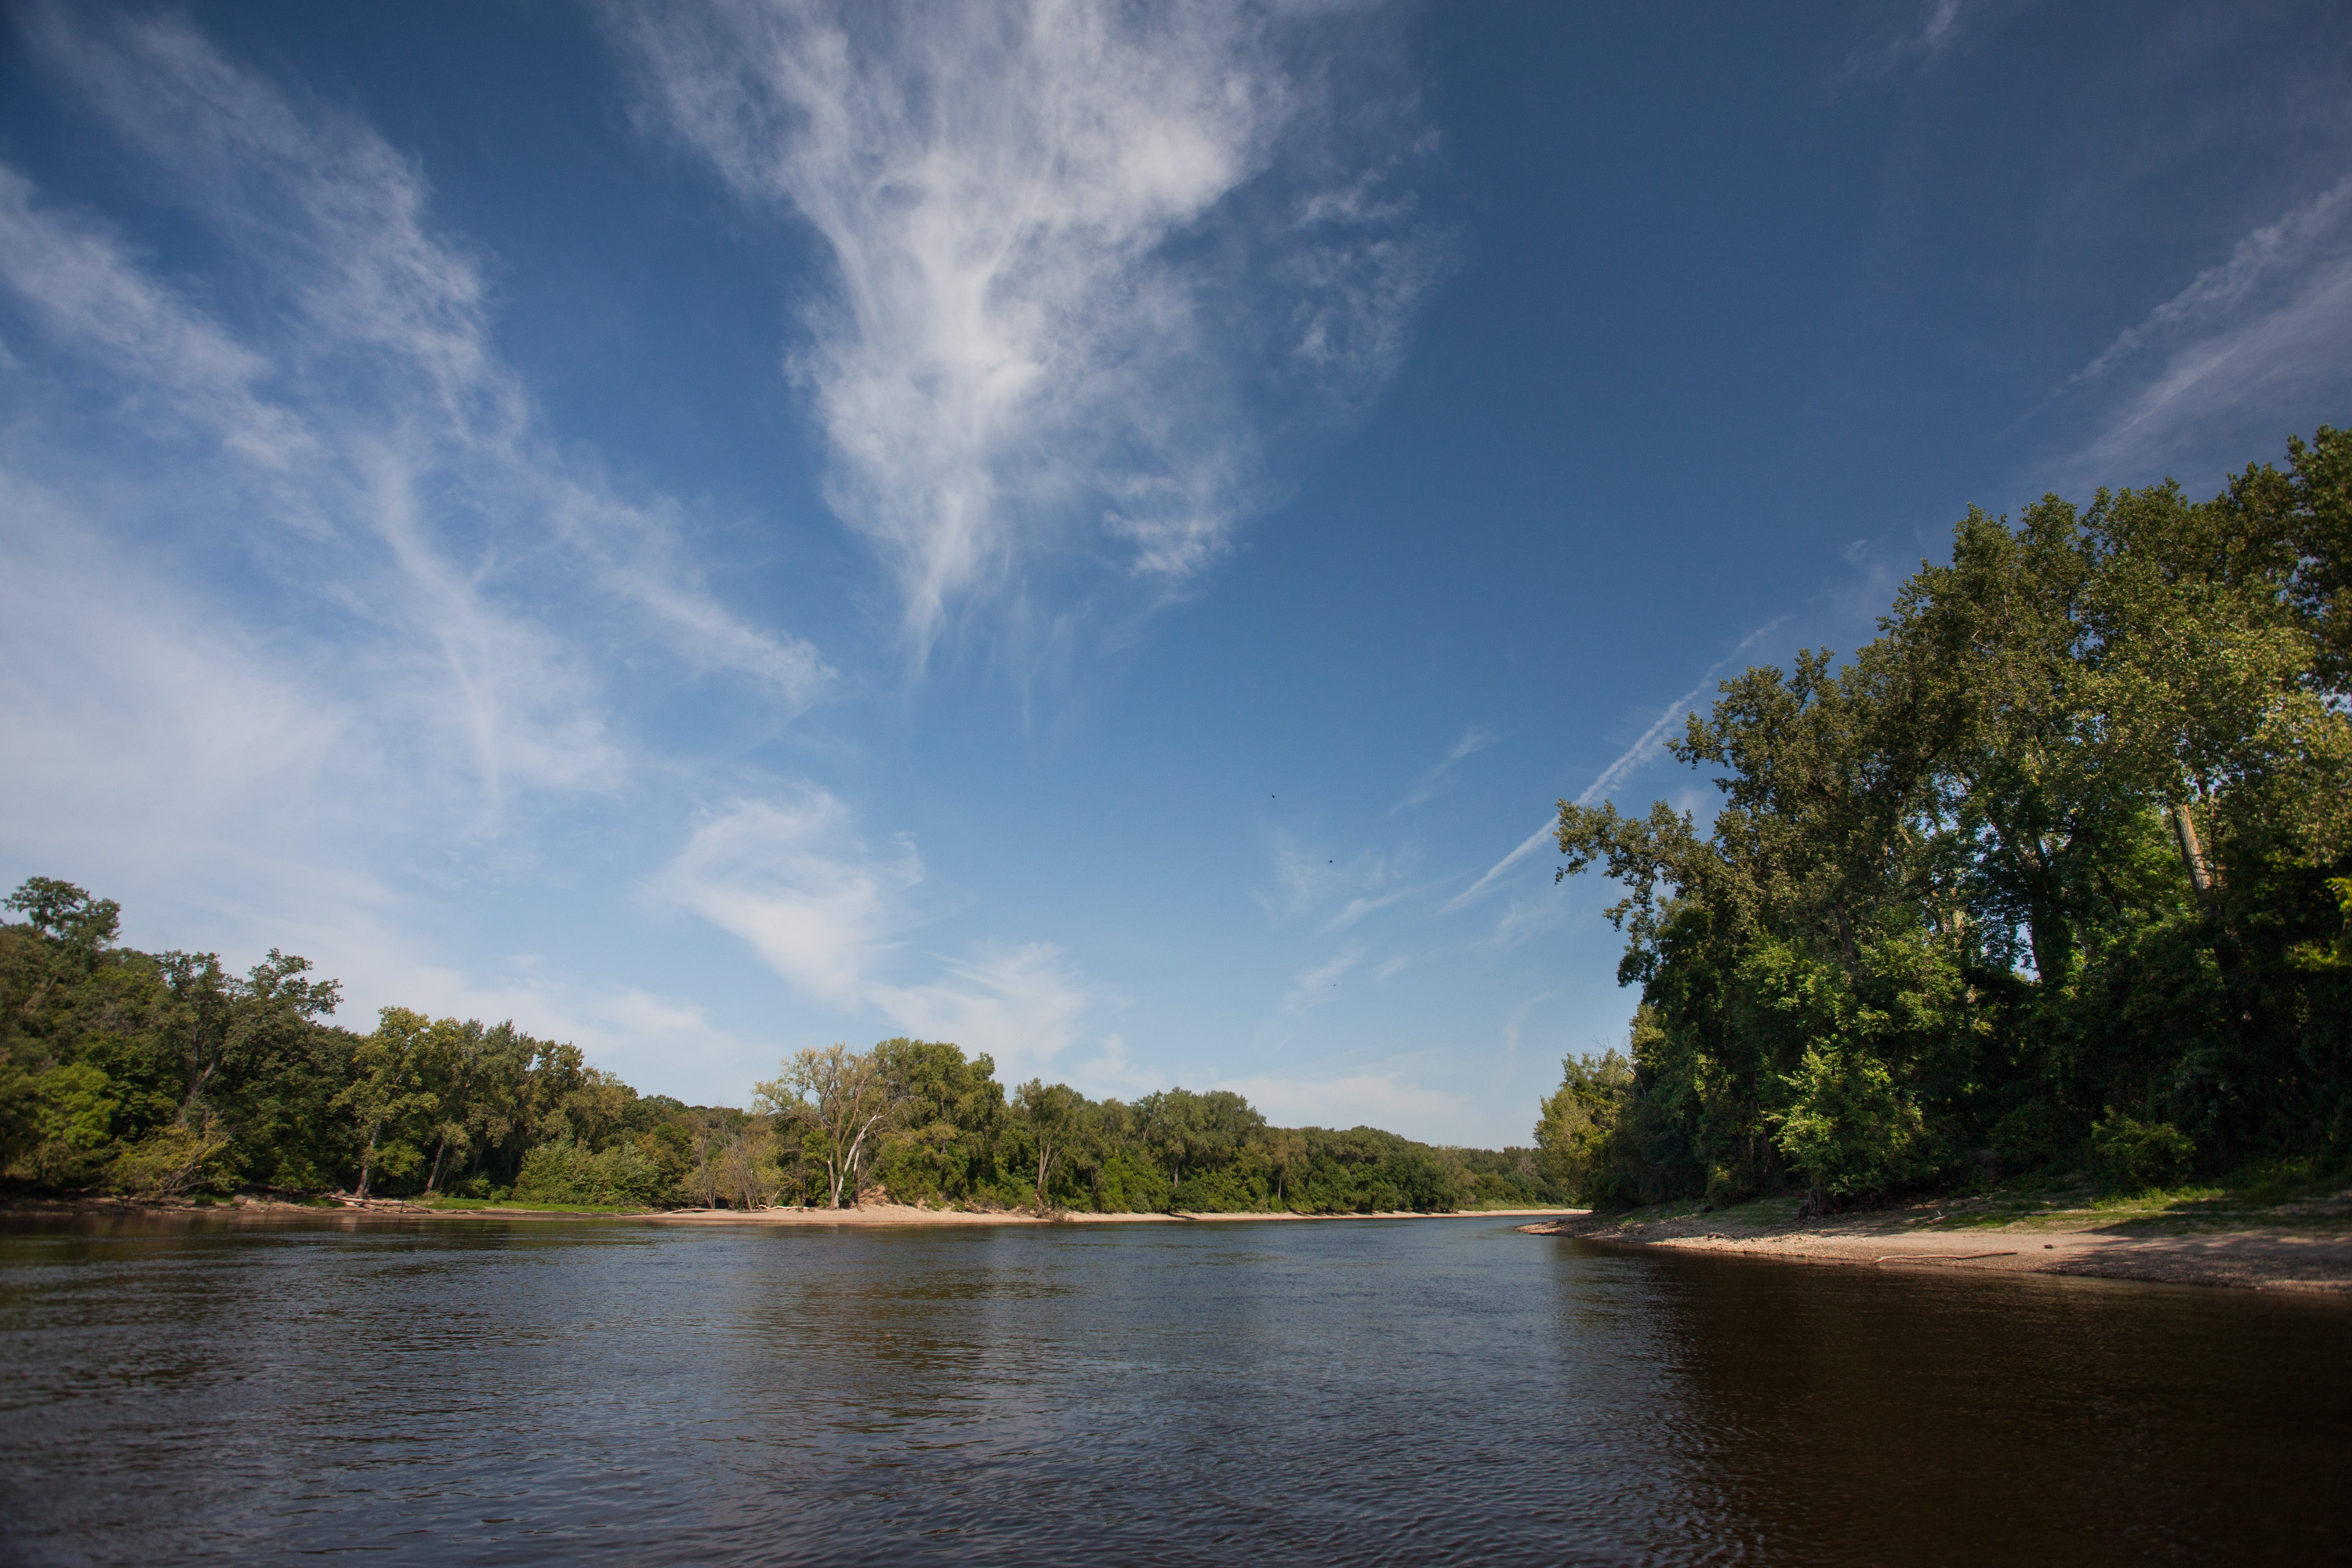 White clouds streak the blue sky over a river flanked by sandy shorelines and green trees.